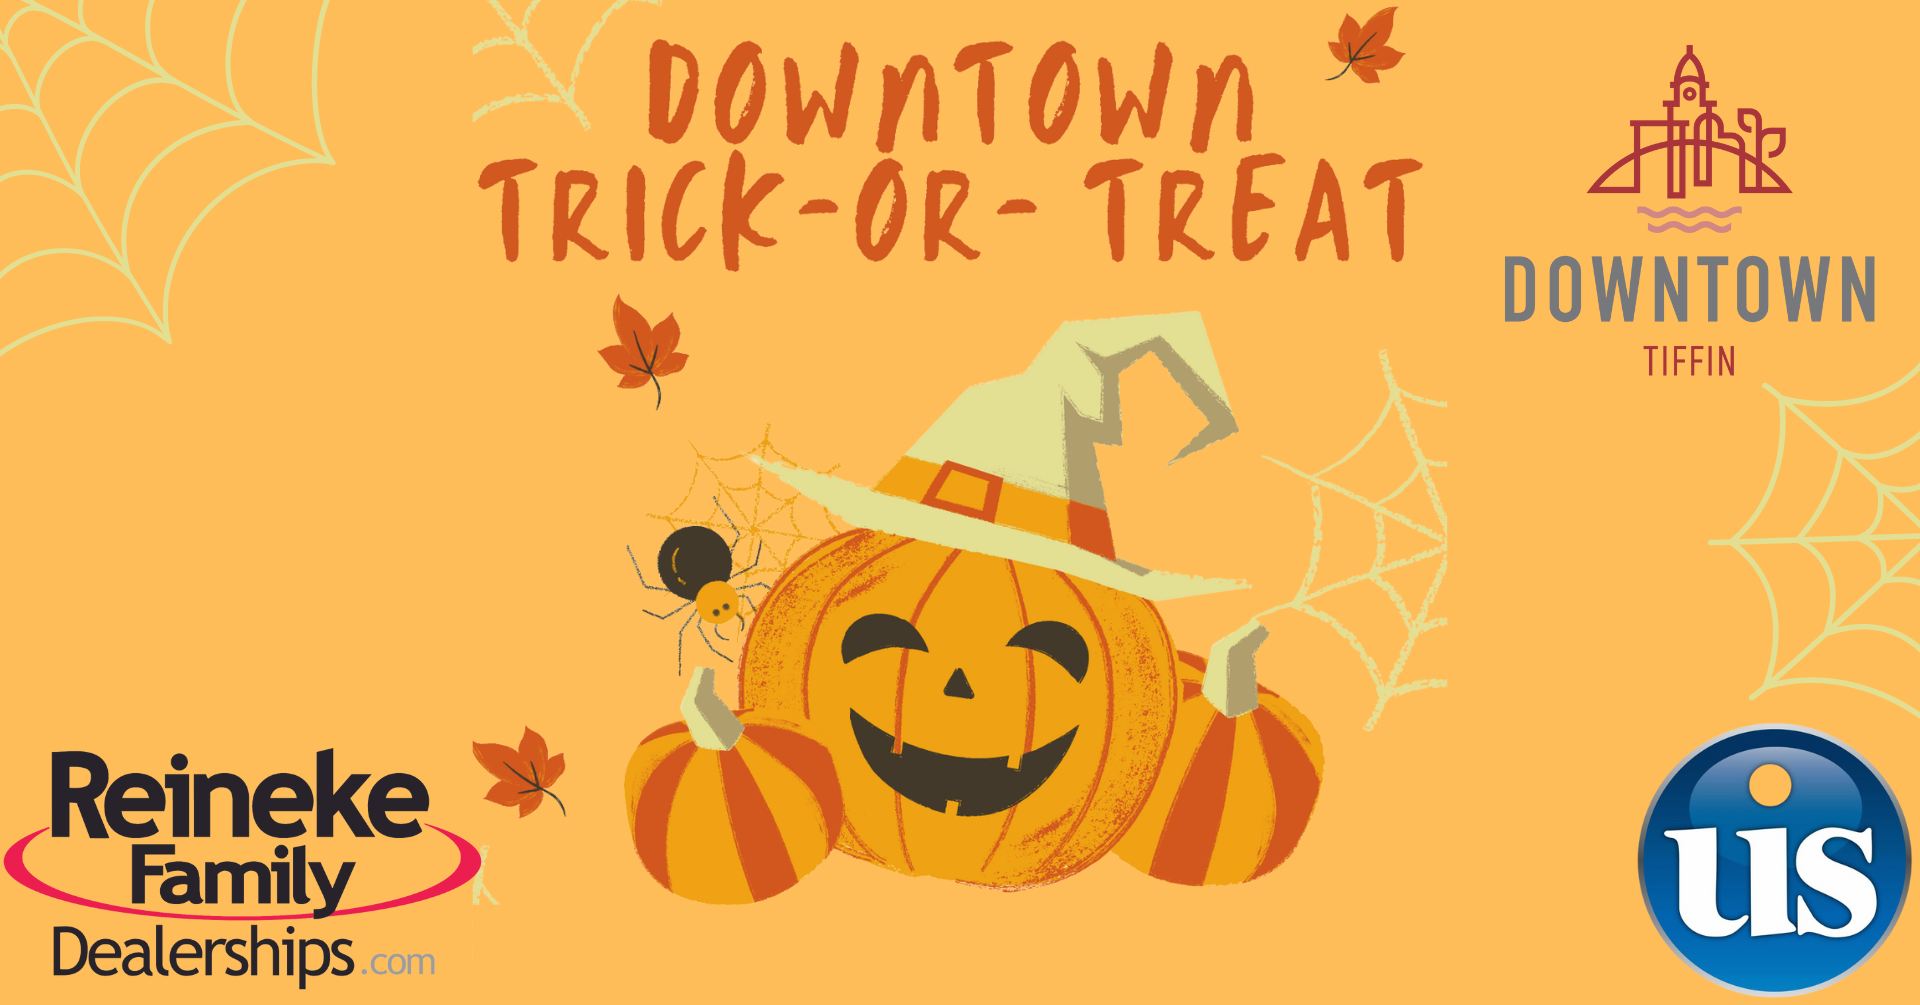 Third Thursday Series | Downtown Trick or Treat